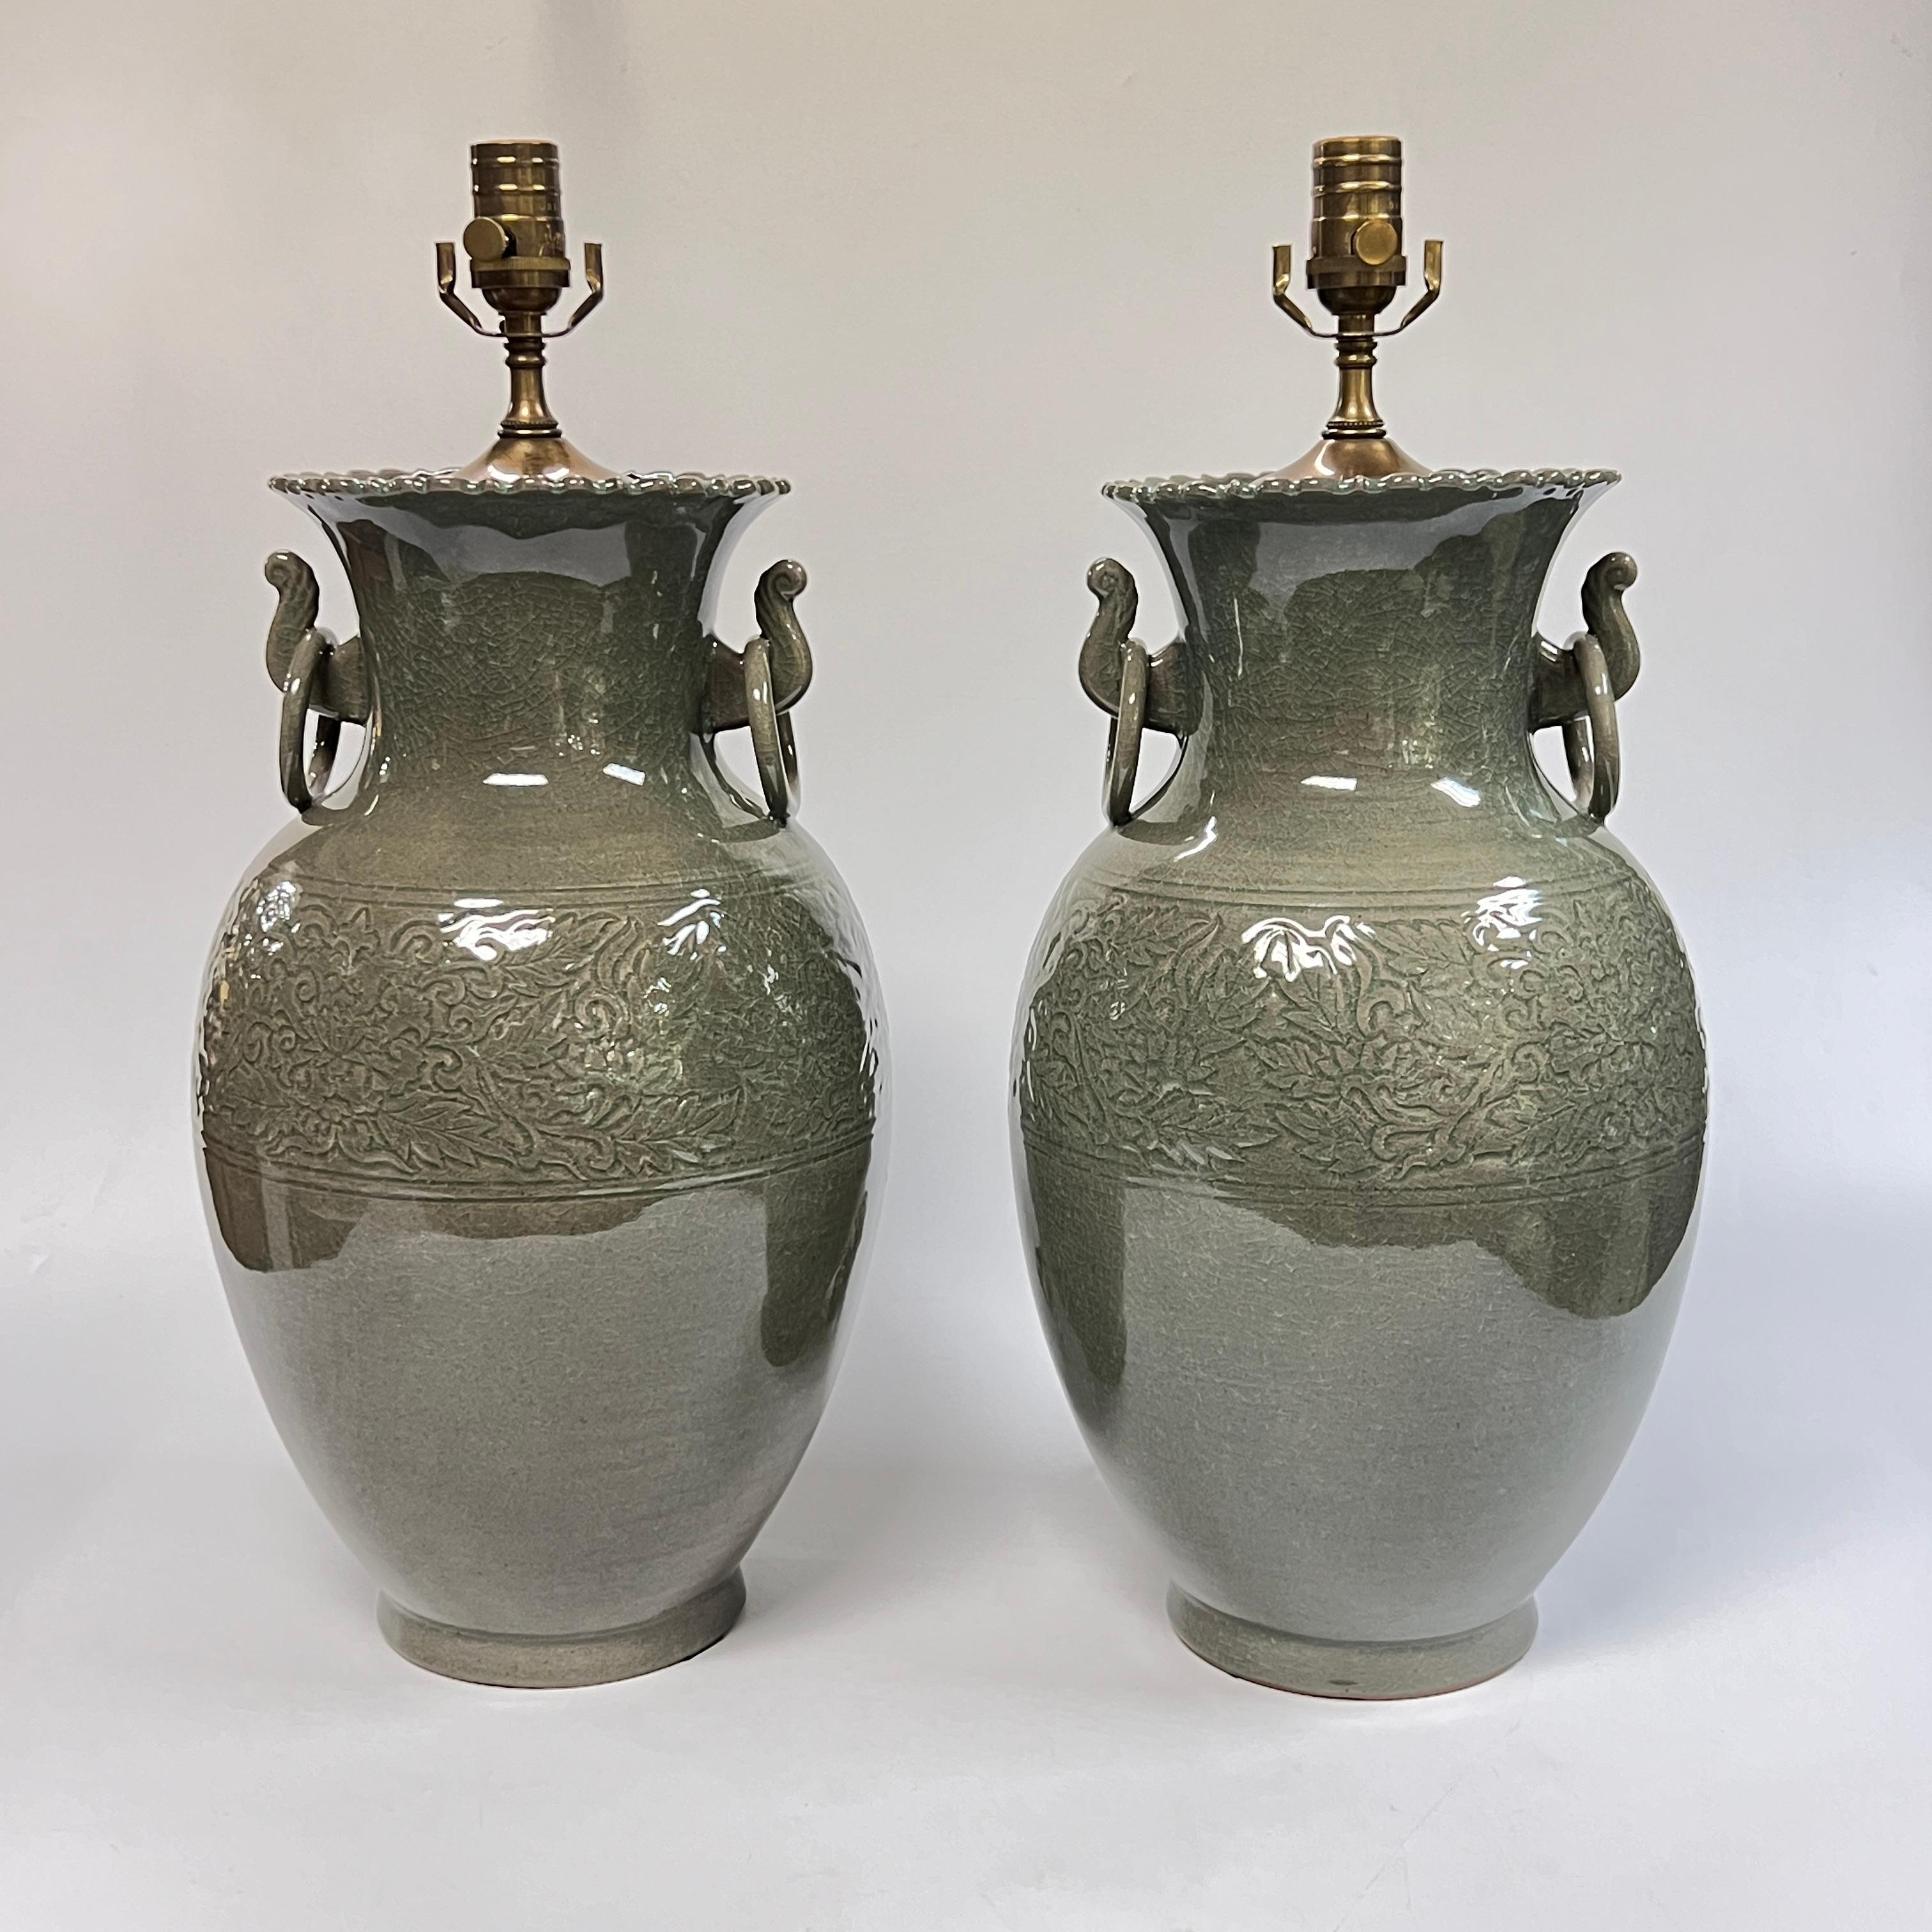 Pair of vintage table lamps made from Chinese ceramic vases with band of incised organic motifs, pinched neck with ring-form handles and crackled glaze. 